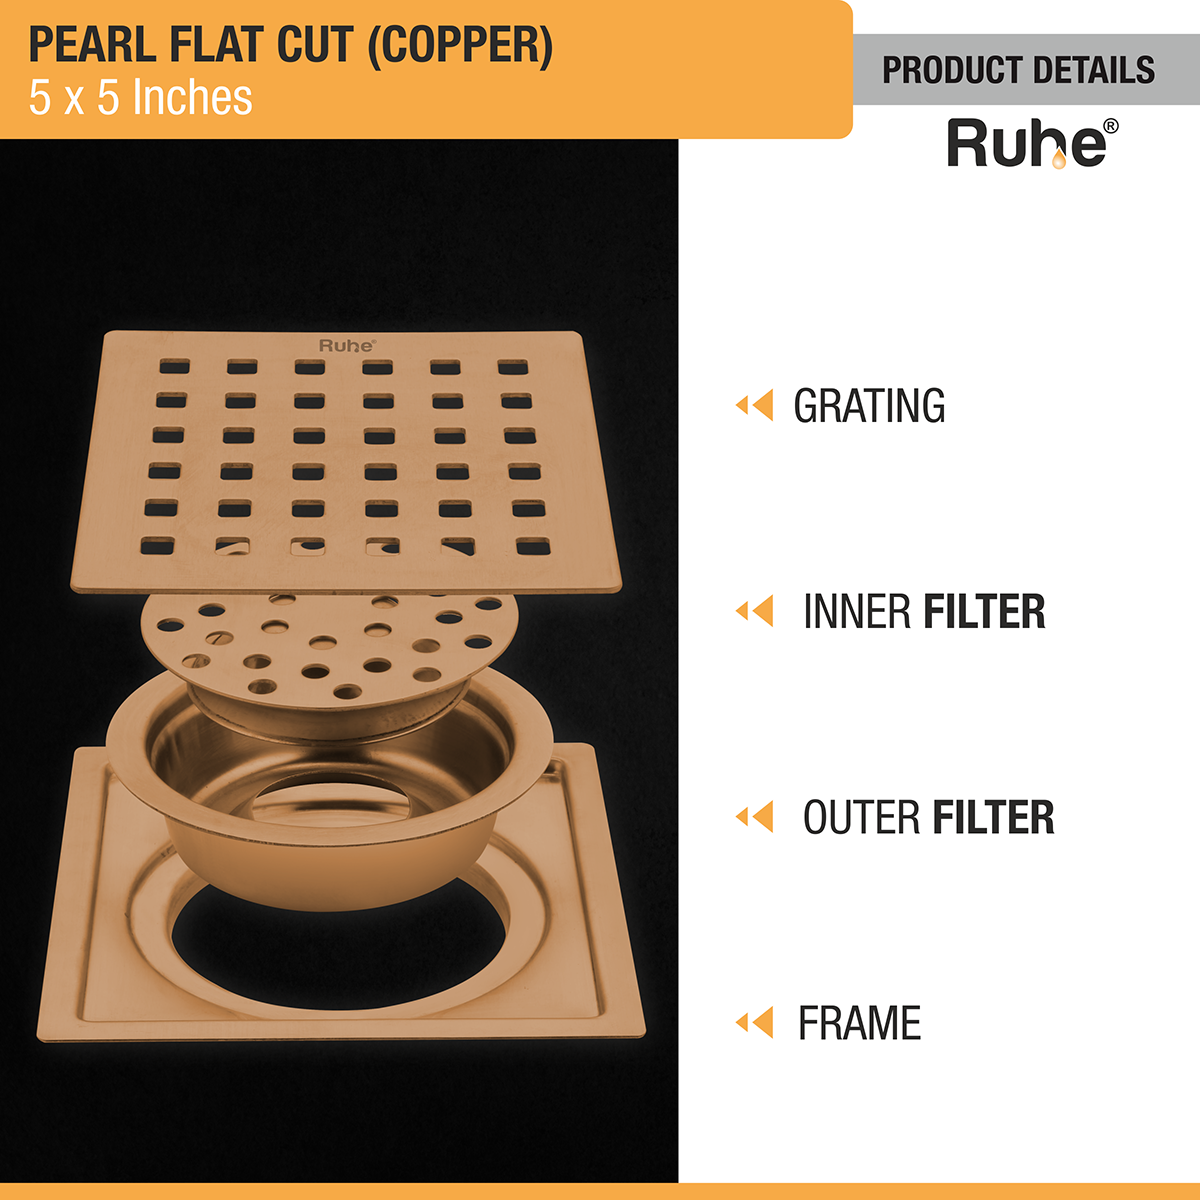 Pearl Square Flat Cut Floor Drain in Antique Copper PVD Coating (5 x 5 Inches) product details